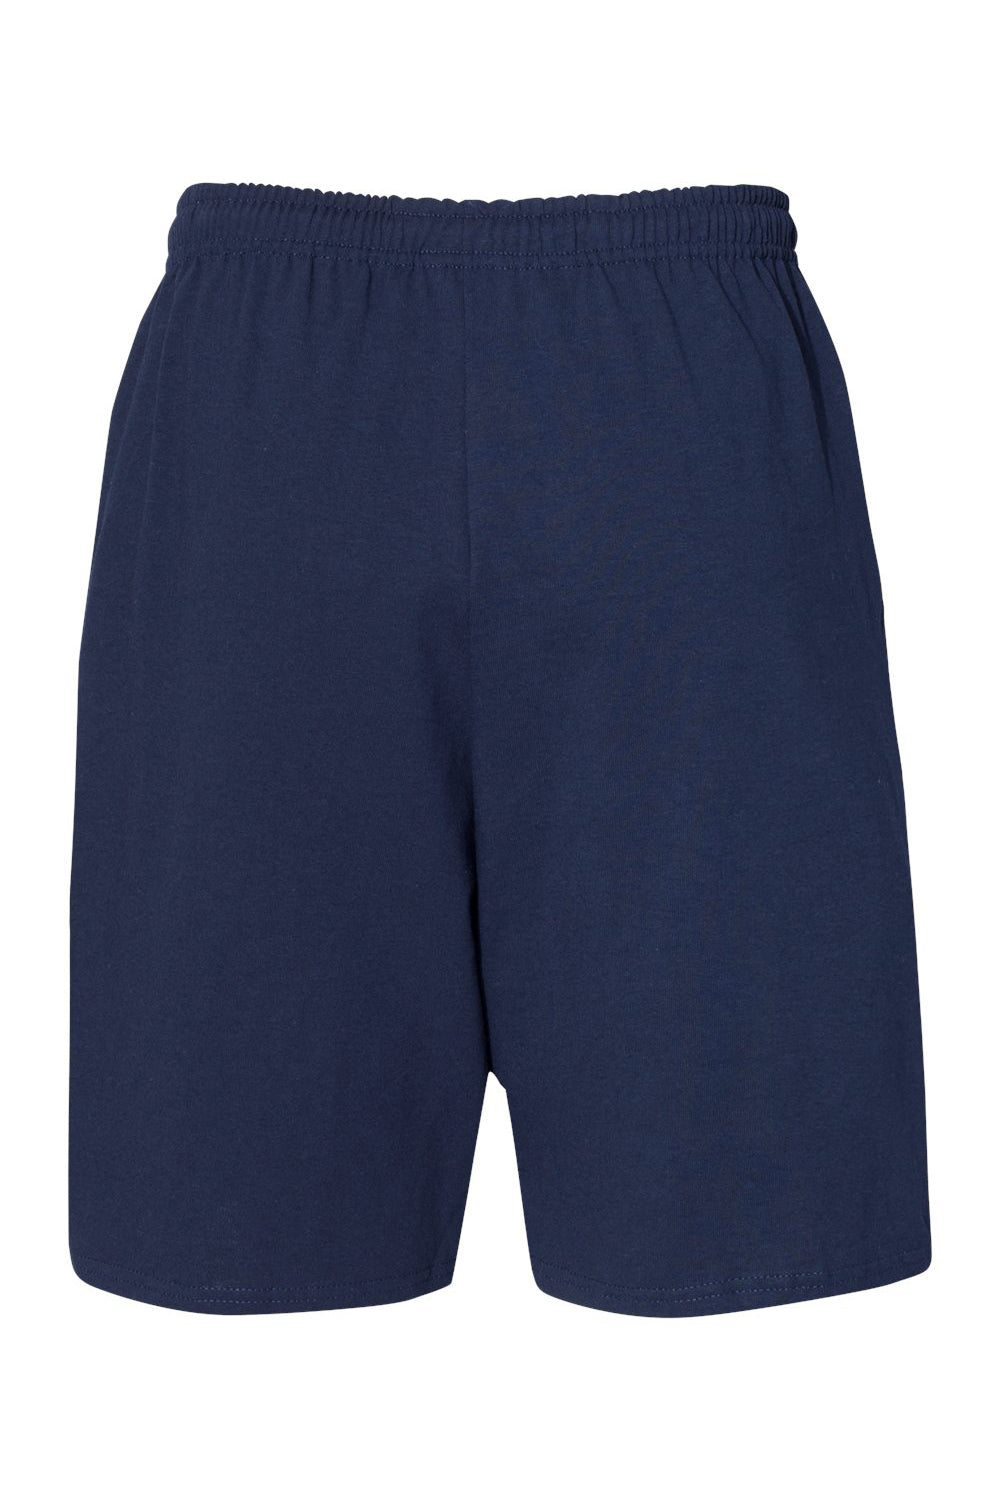 Russell Athletic 25843M Mens Classic Jersey Shorts w/ Pockets Navy Blue Flat Back